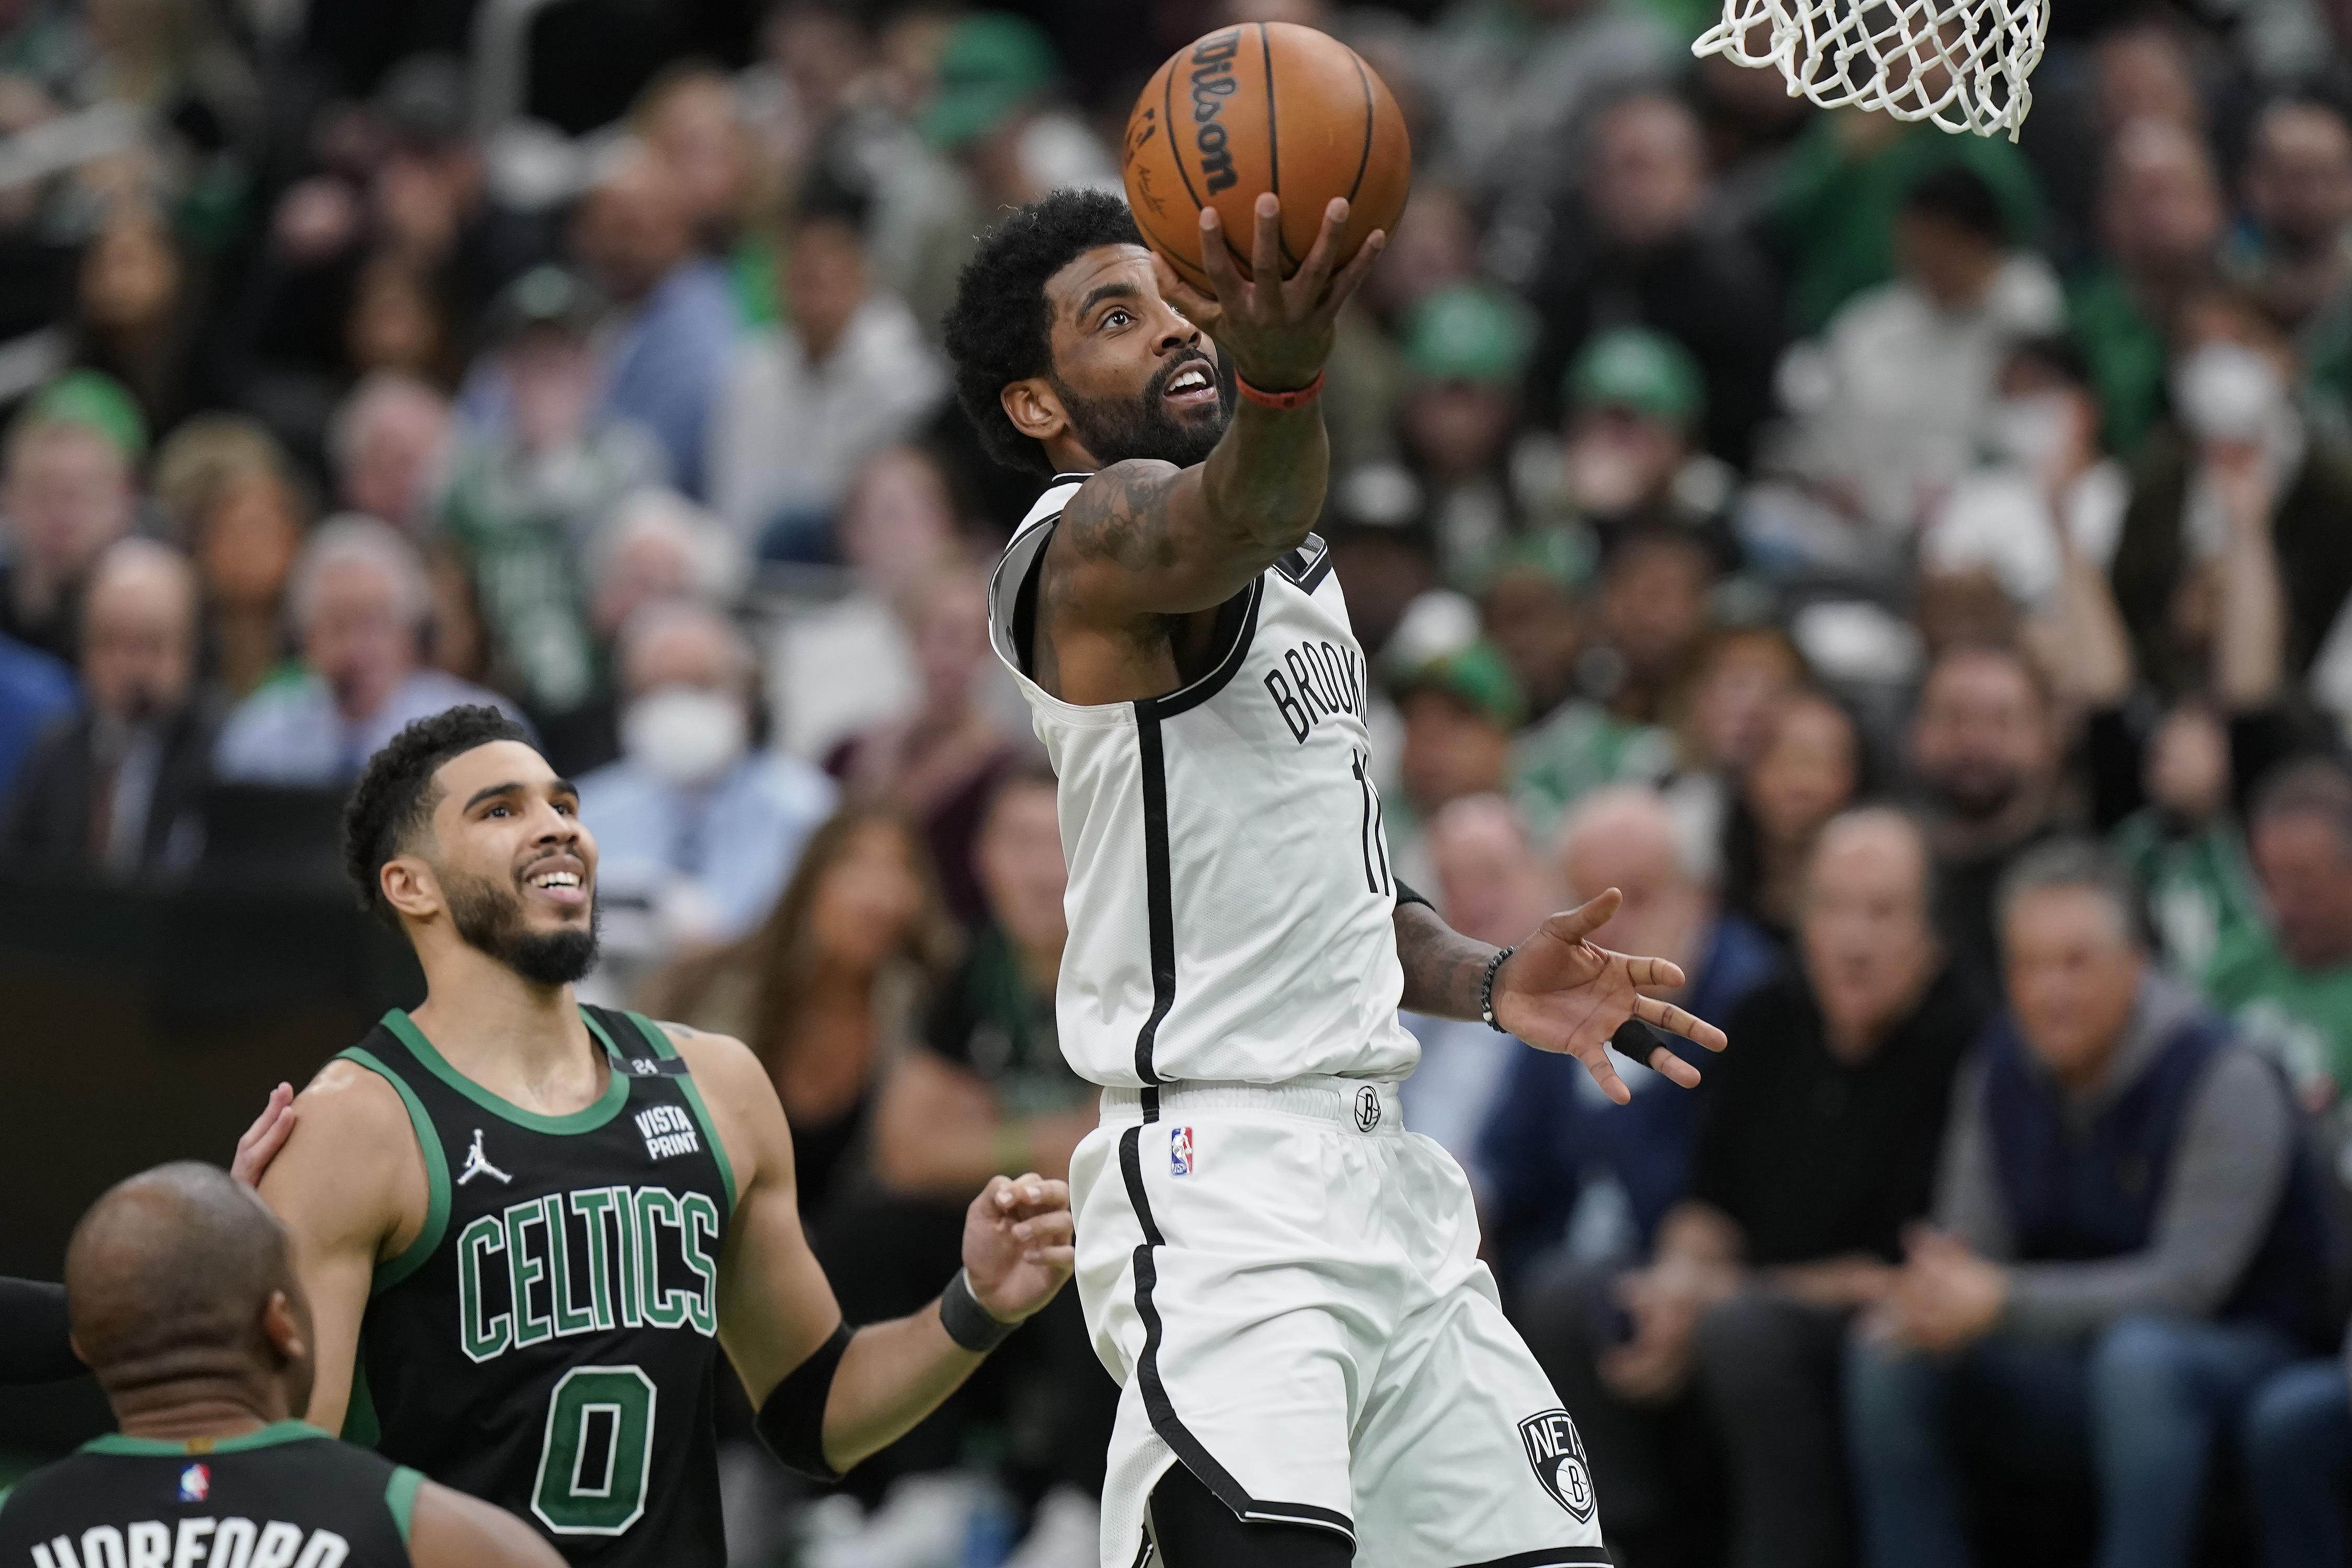 Boston fans don't get to Kyrie Irving, Celtics' defense does